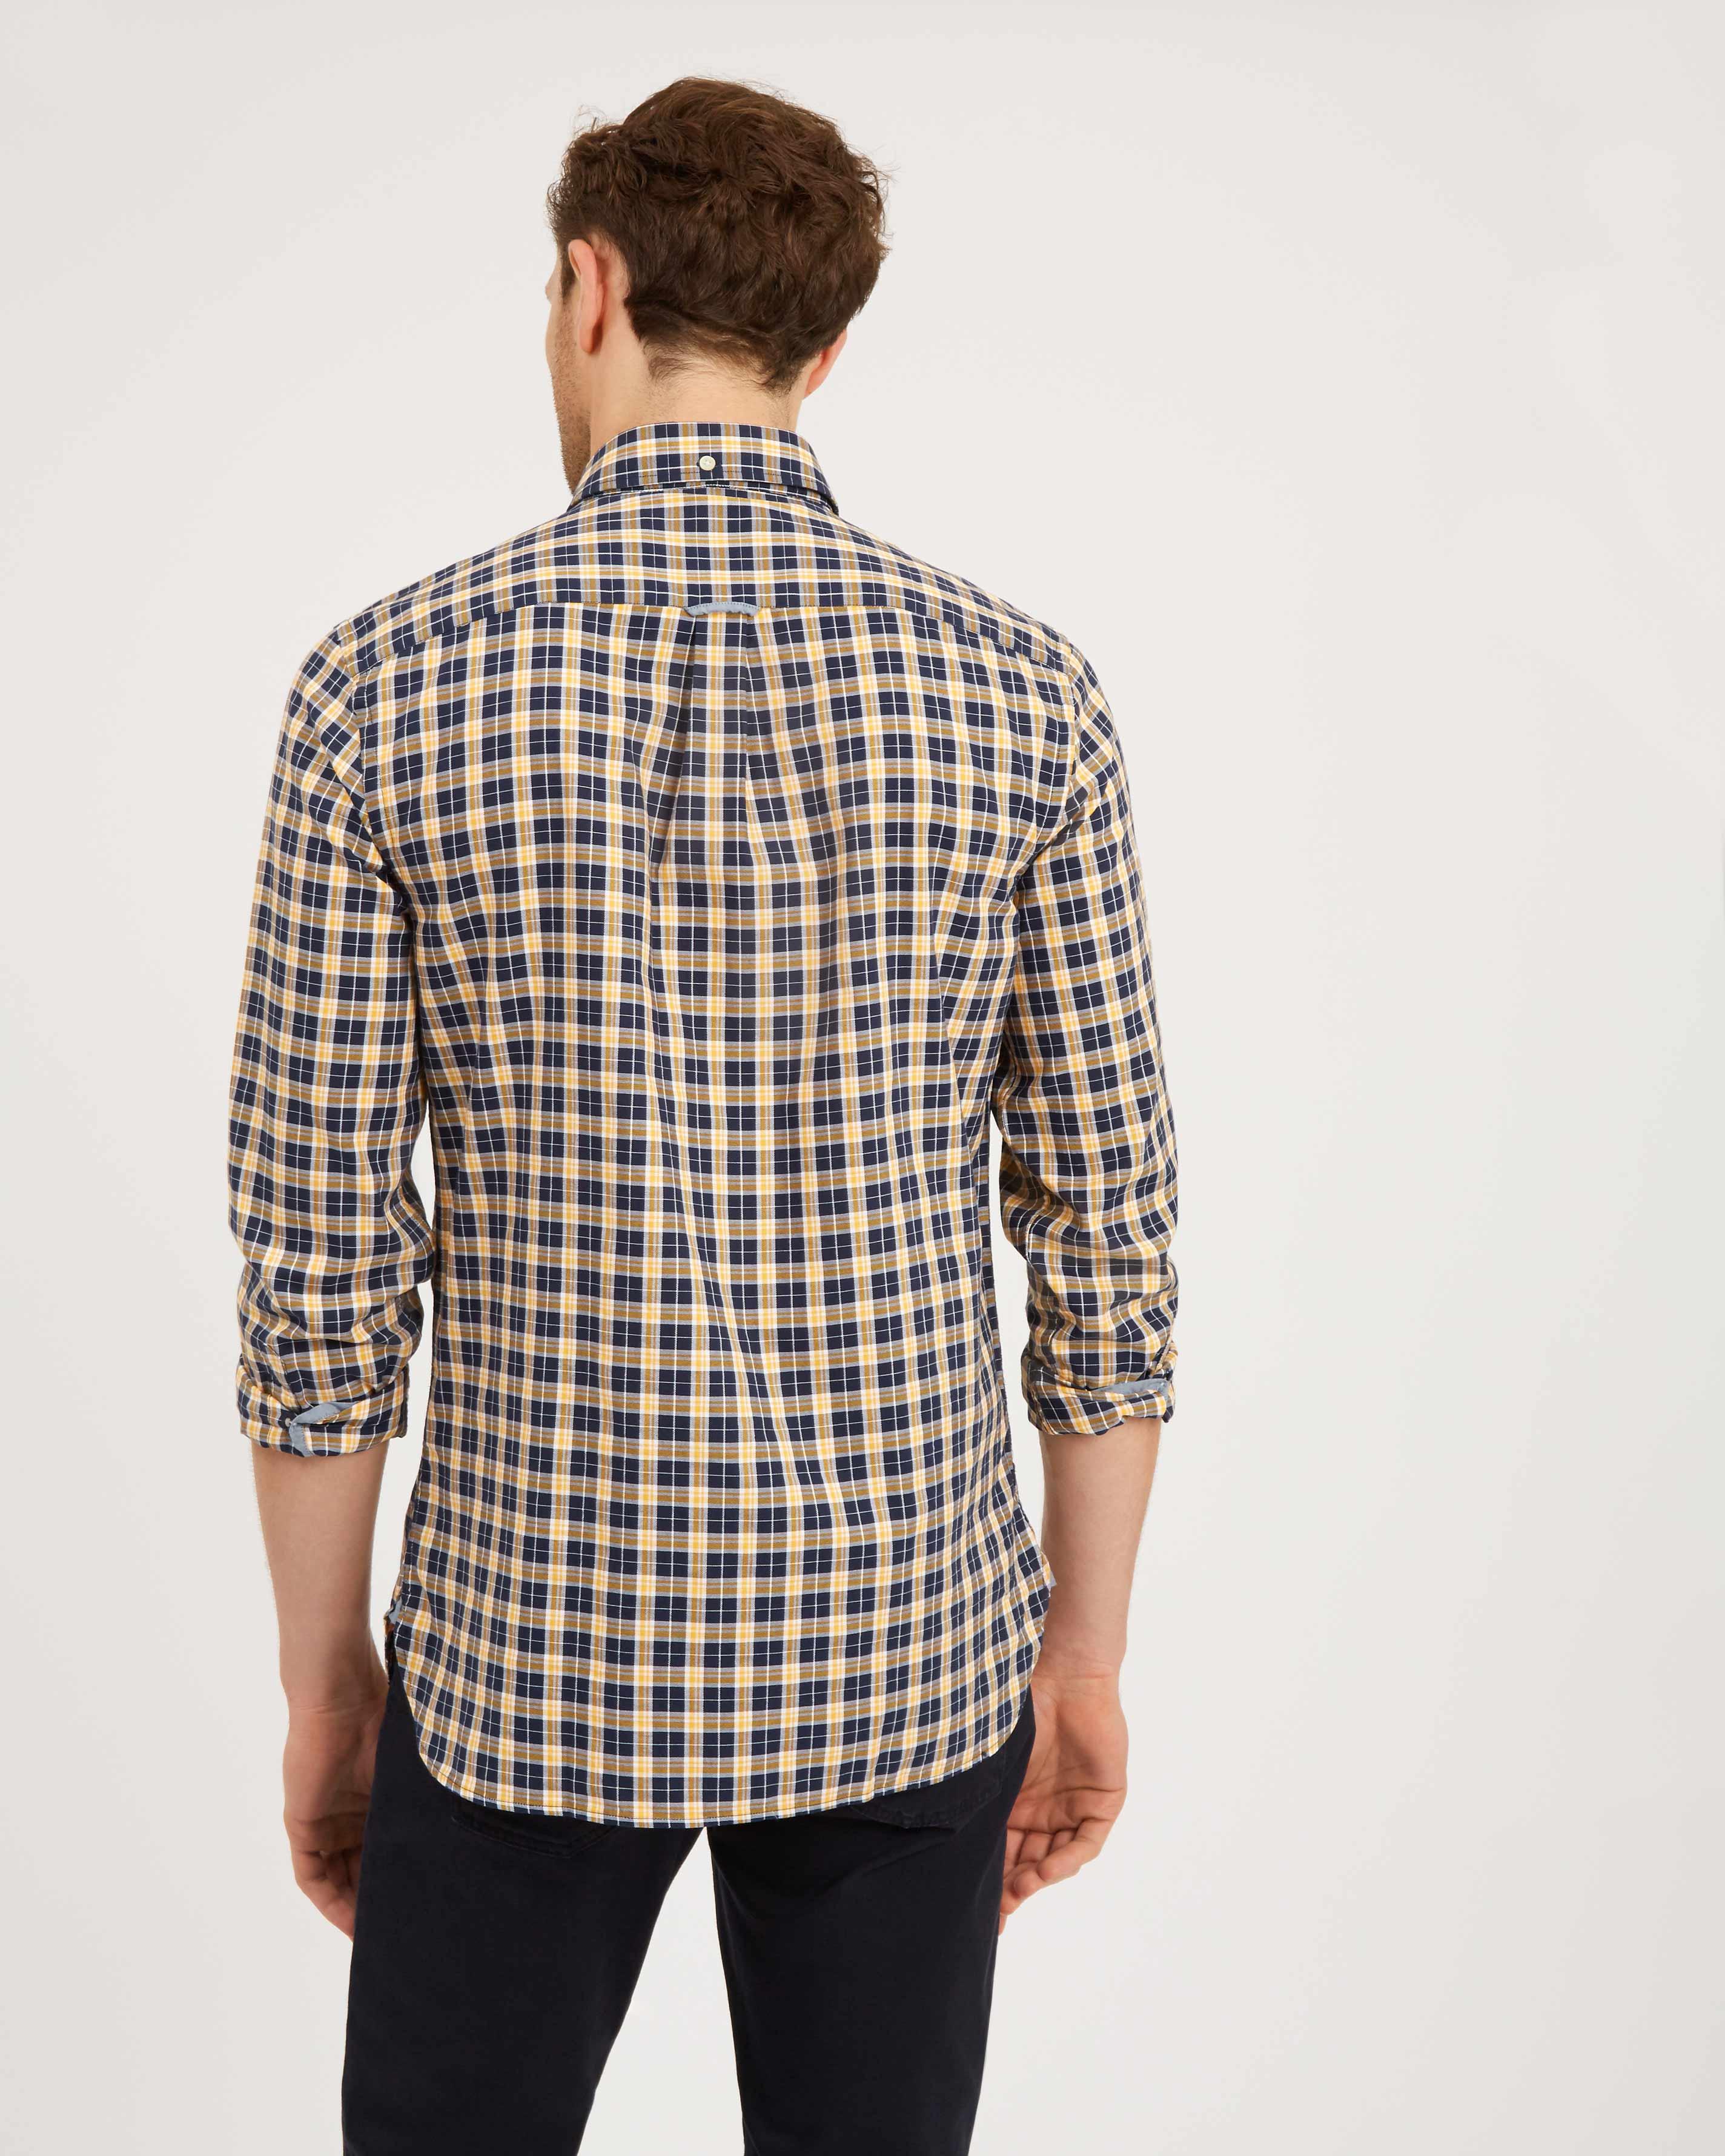 Lyst - Jaeger Casual Multi Check Shirt for Men